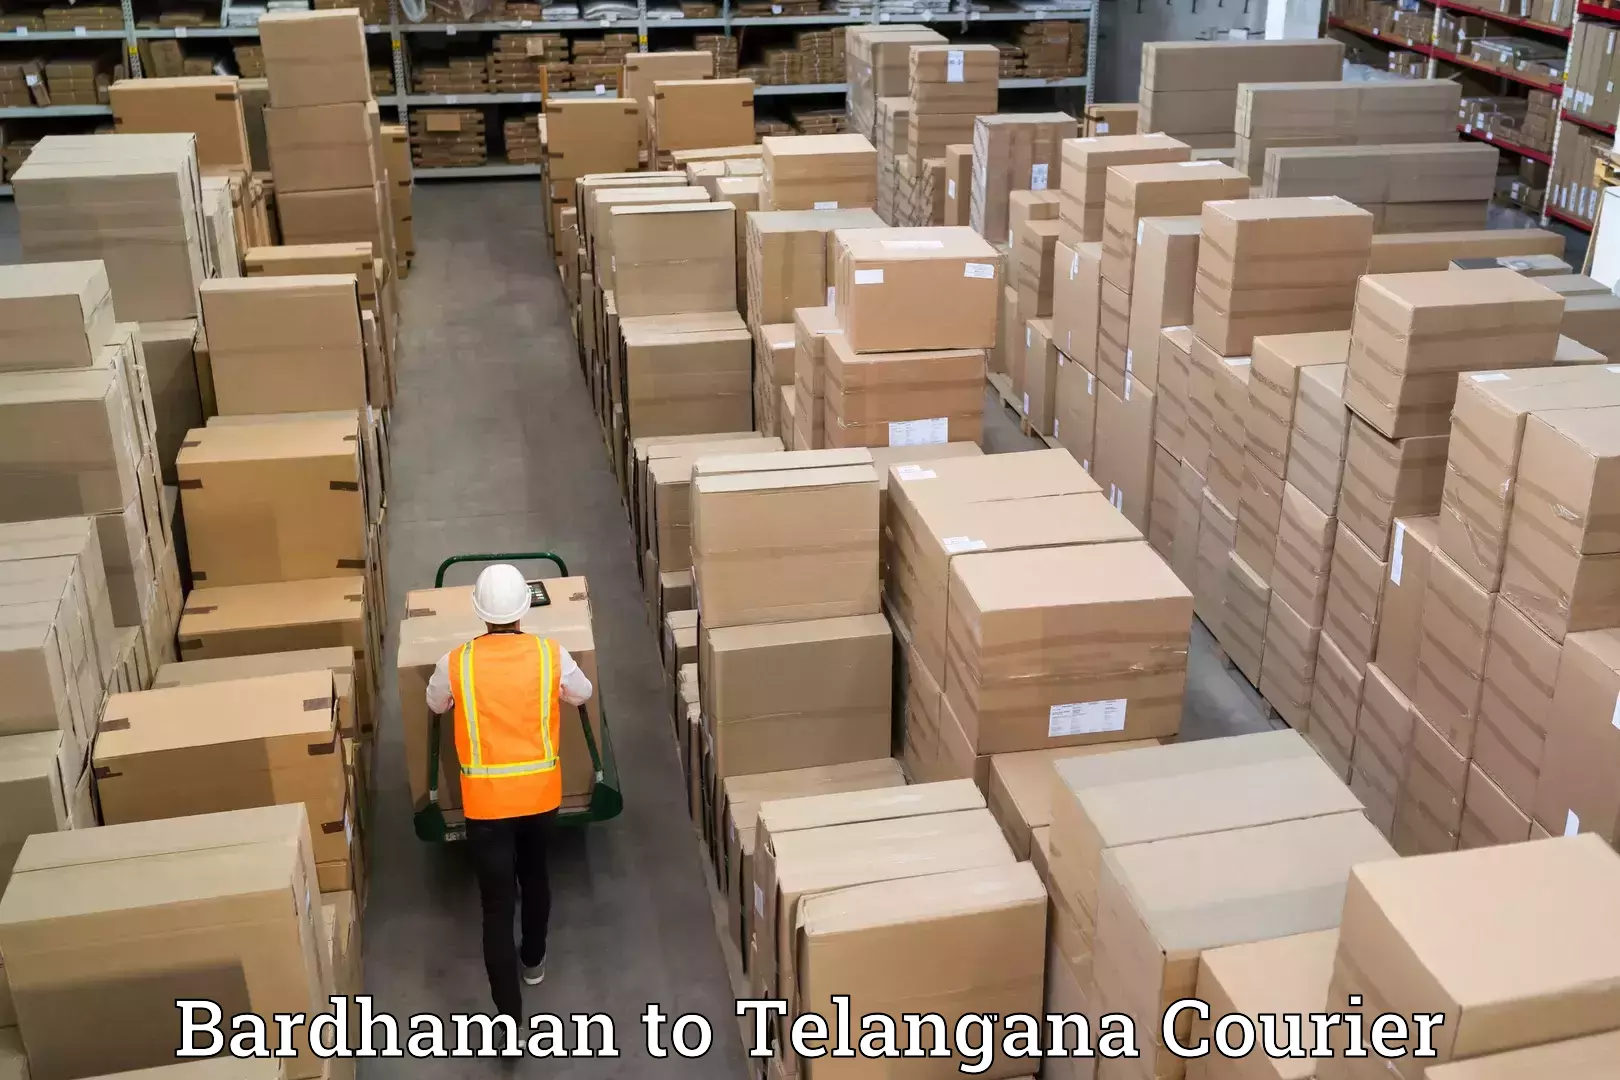 Trusted relocation experts Bardhaman to Telangana